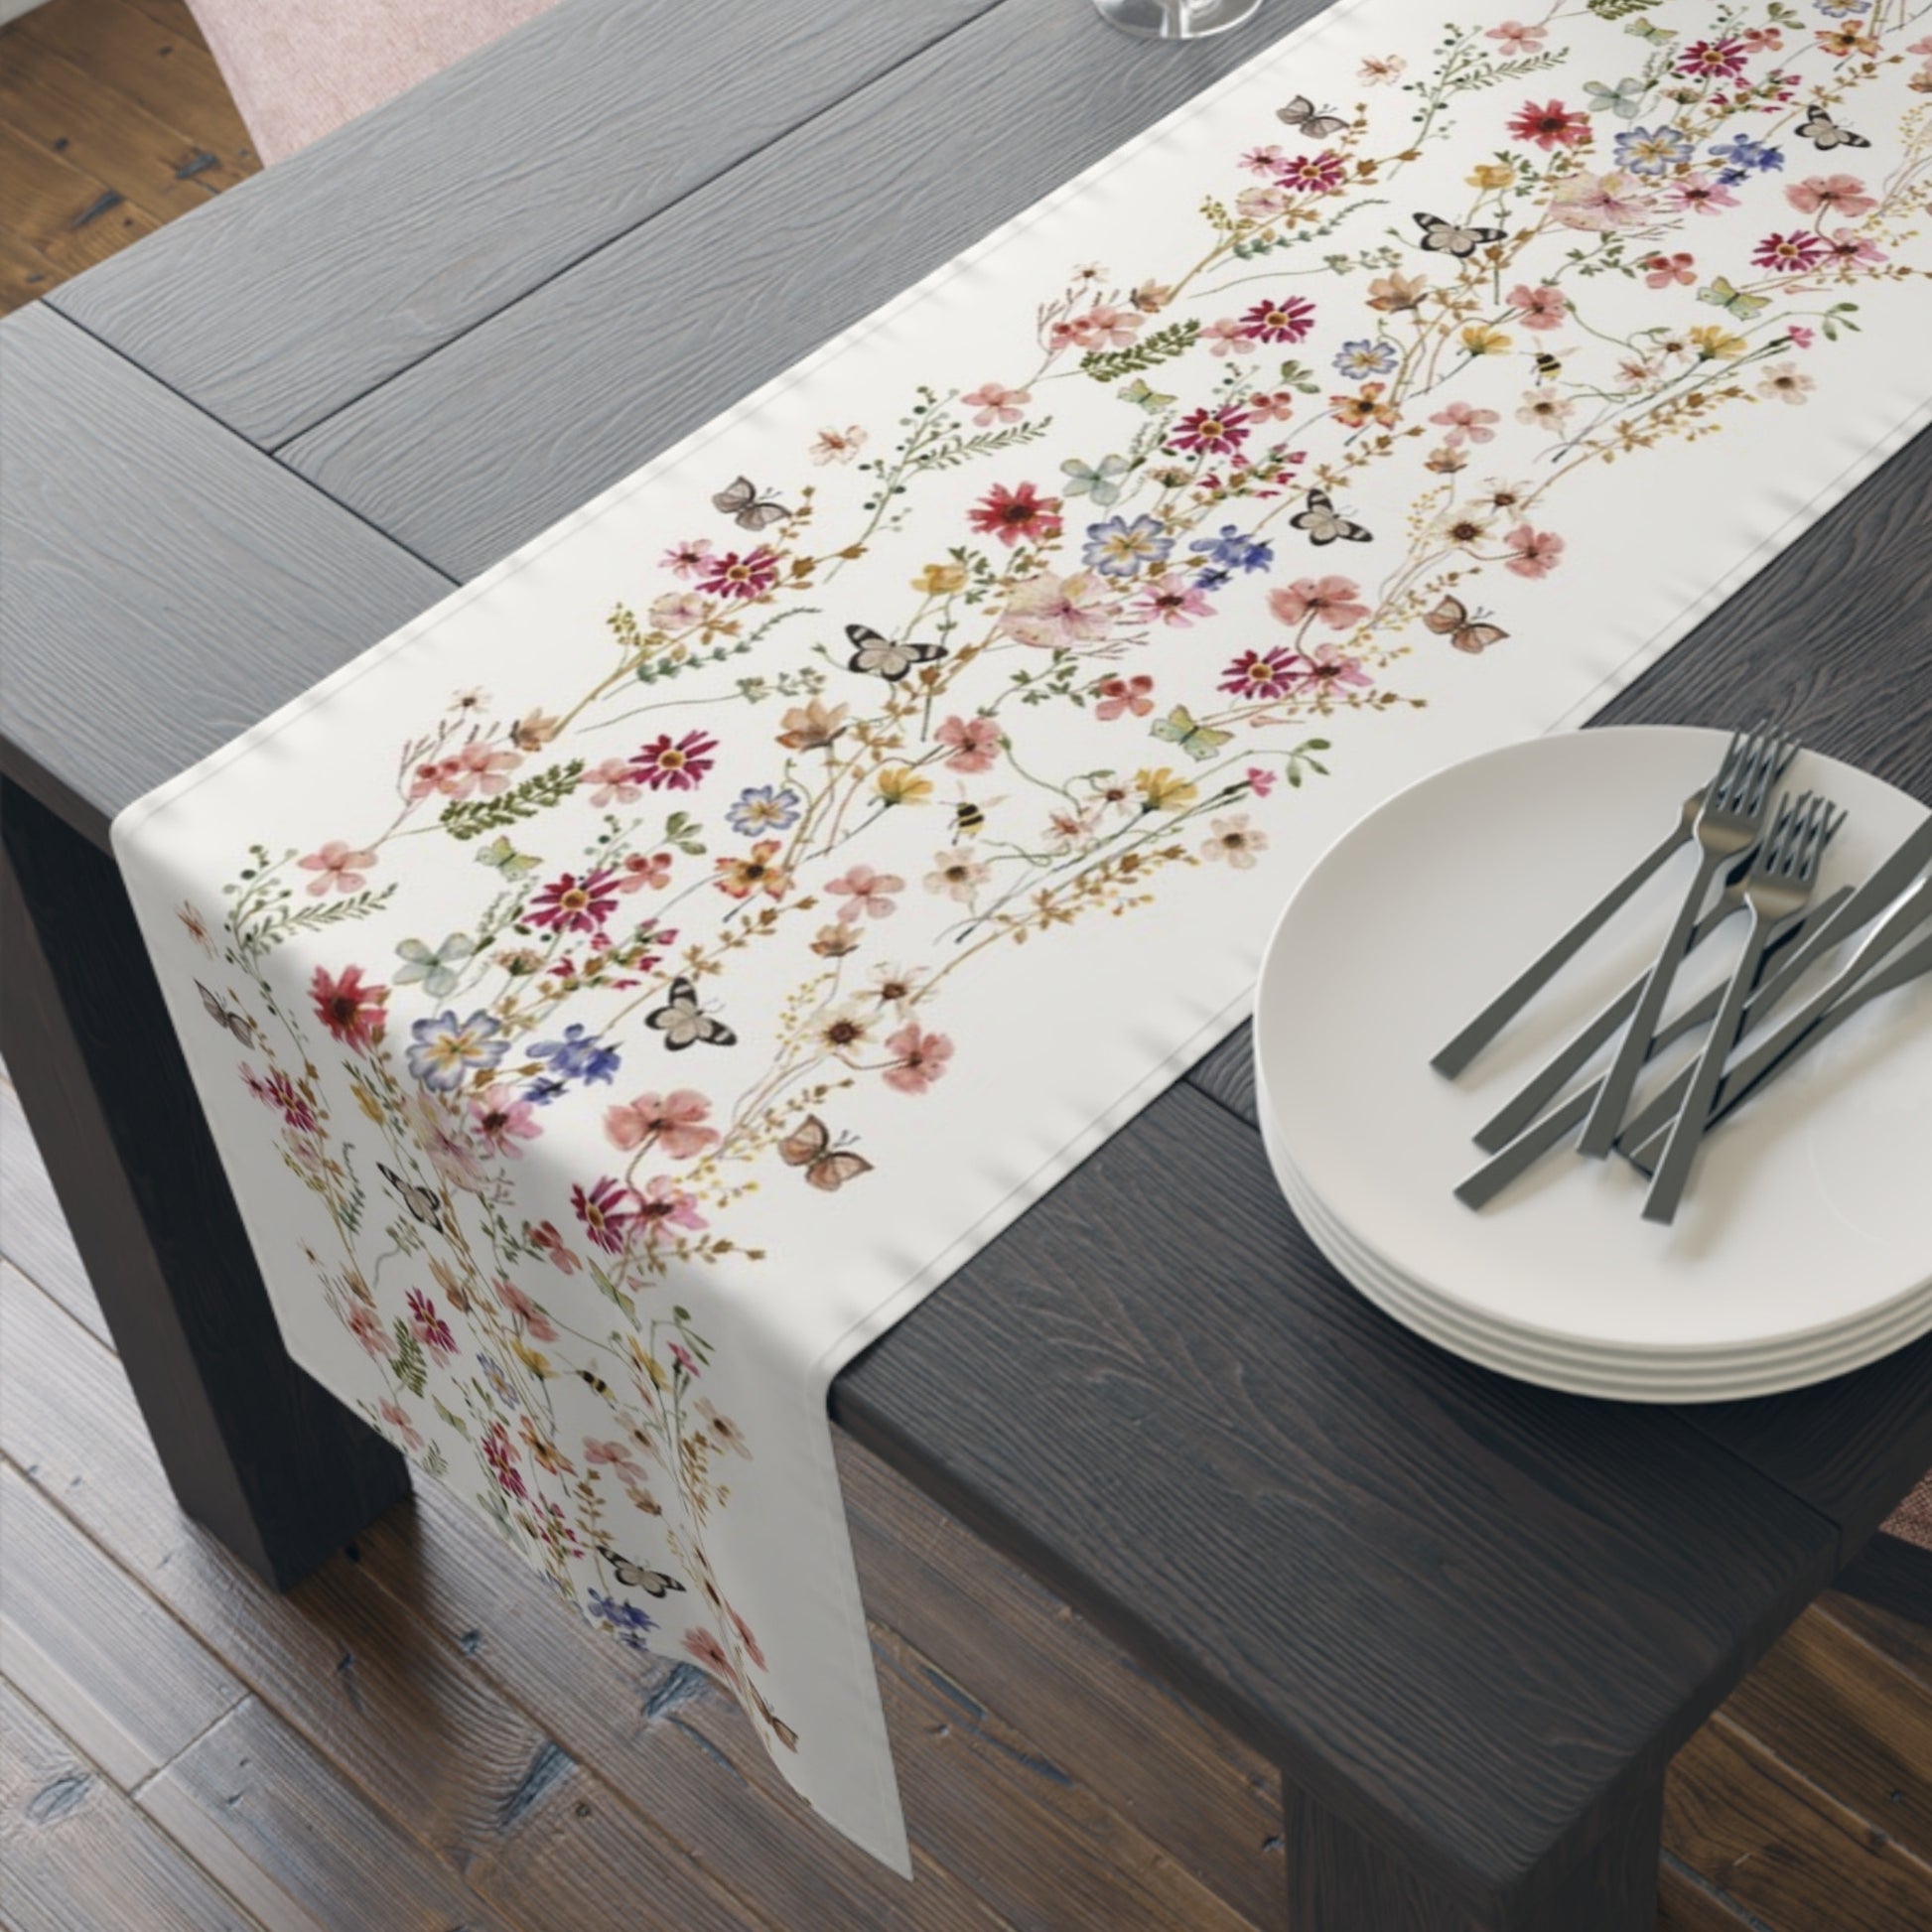 black wood table with Watercolor Pressed & Dried Wildflowers TABLE RUNNER from Blue Water Songs on it